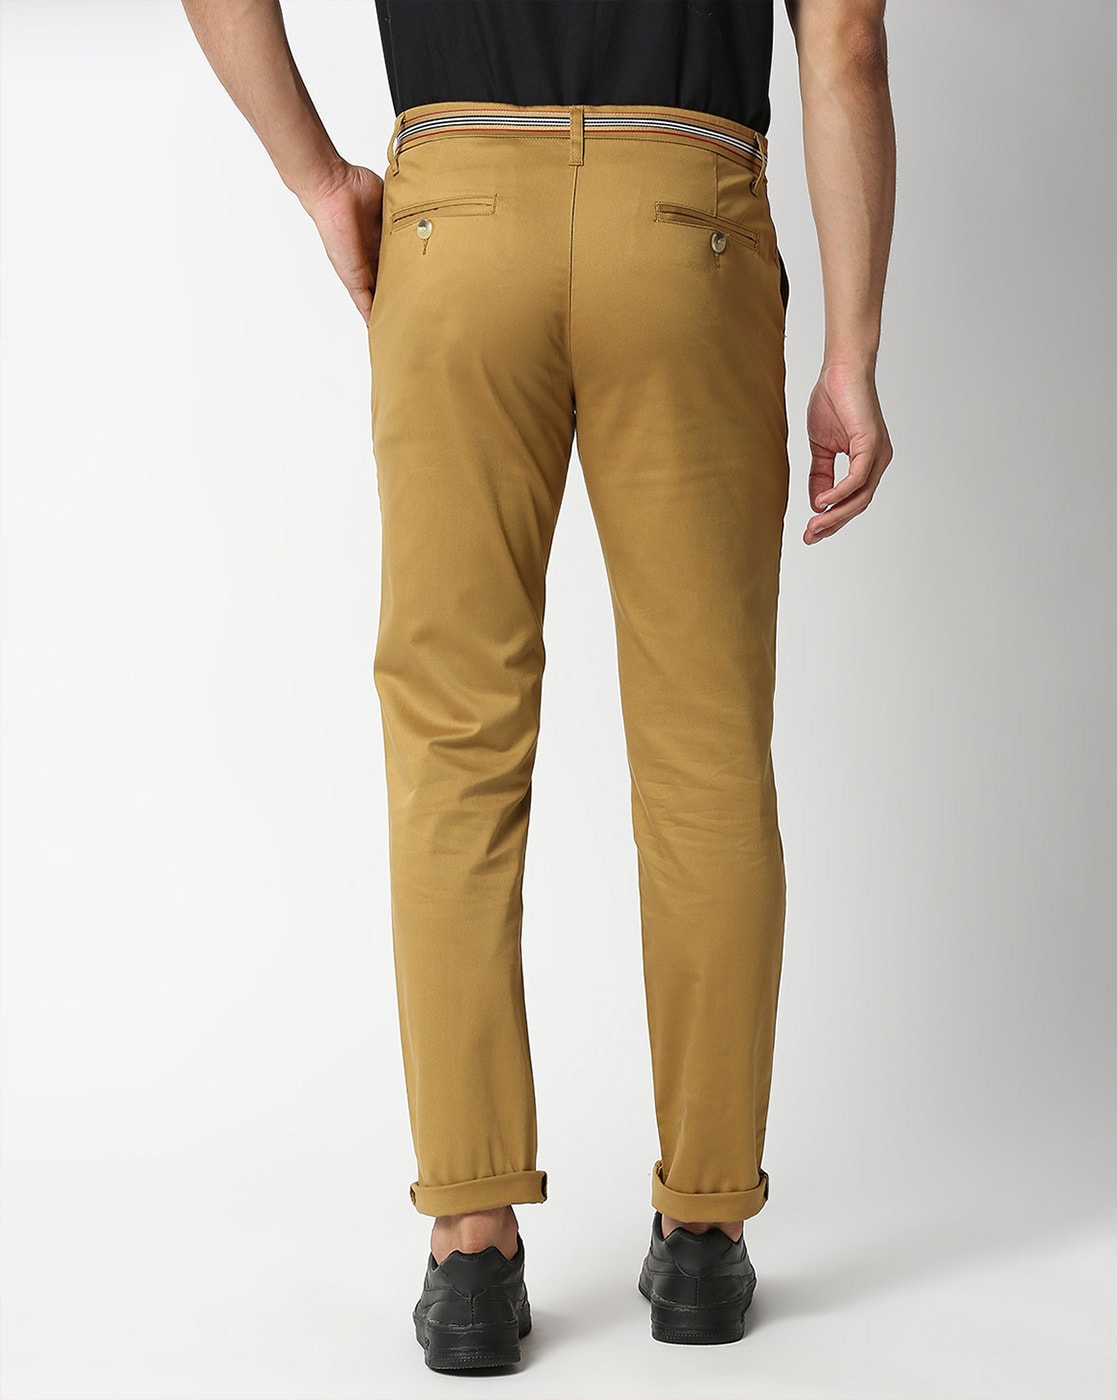 Light Brown Pleated Braddon Trousers in Pure Cotton | SUITSUPPLY Malaysia